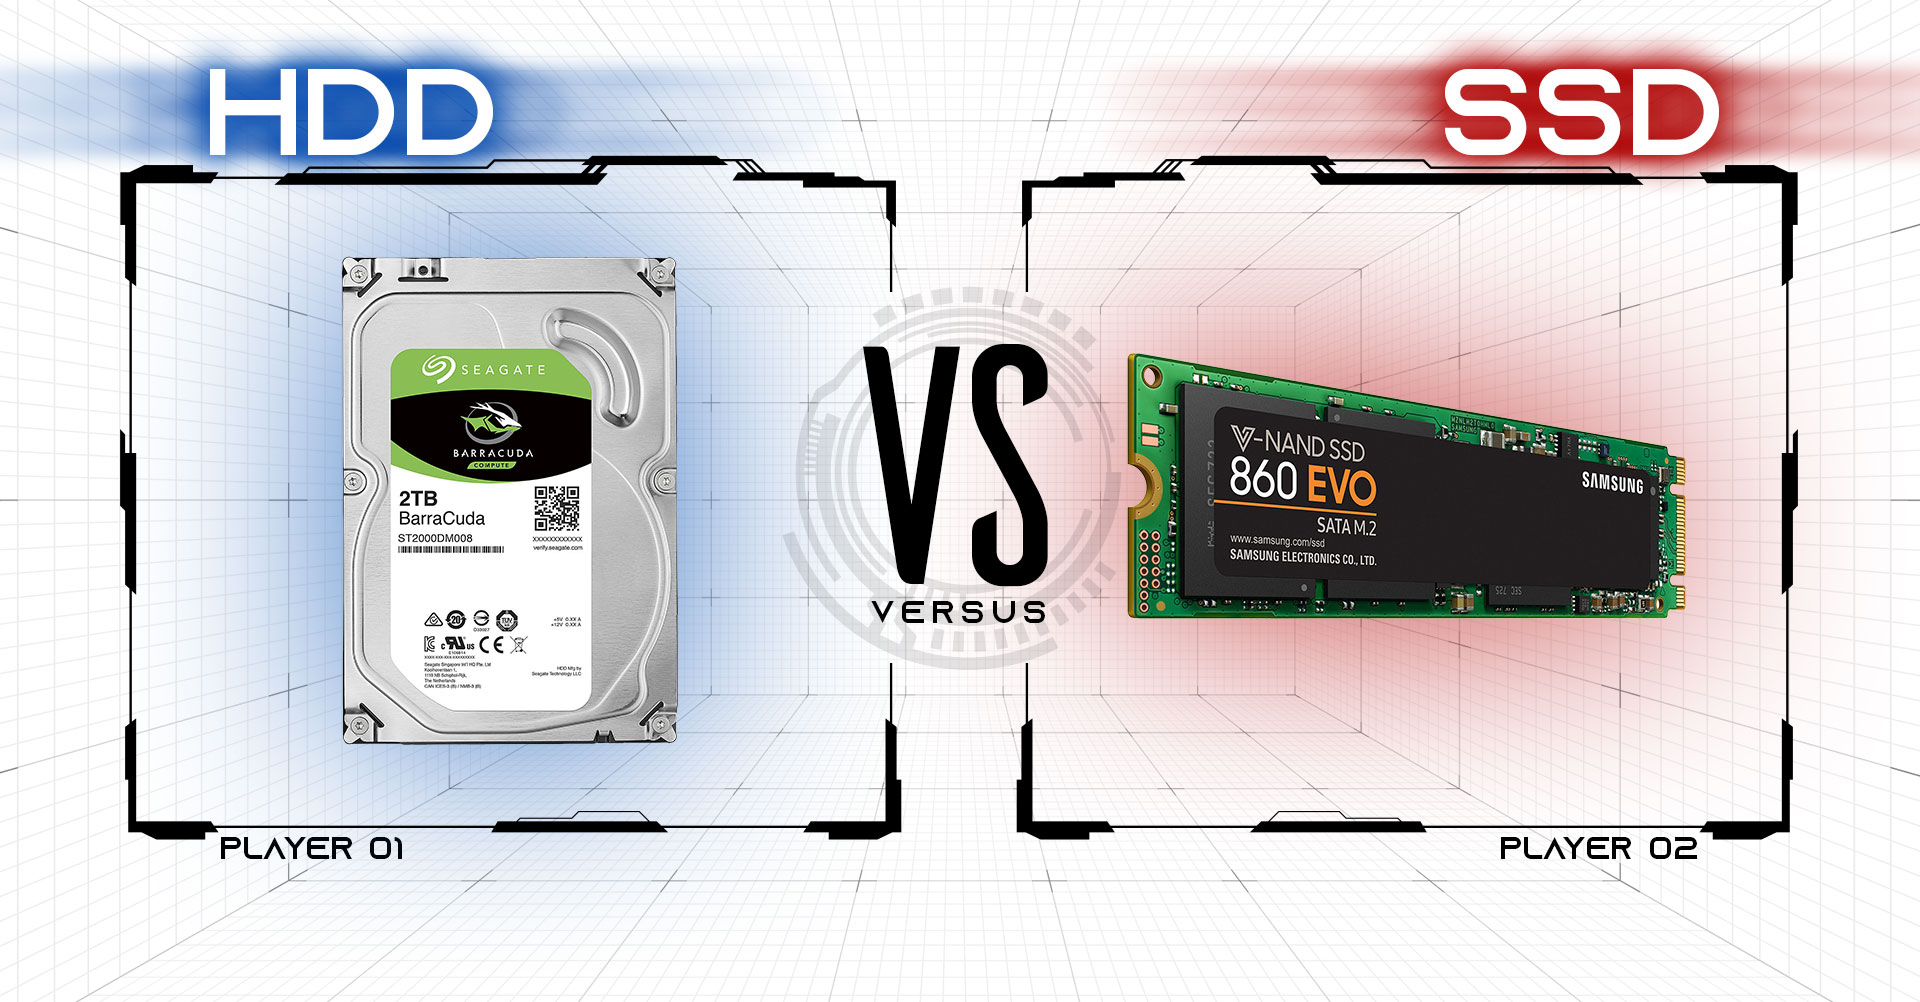 Guide Stockage : Disque HDD ou SSD - Trade Discount